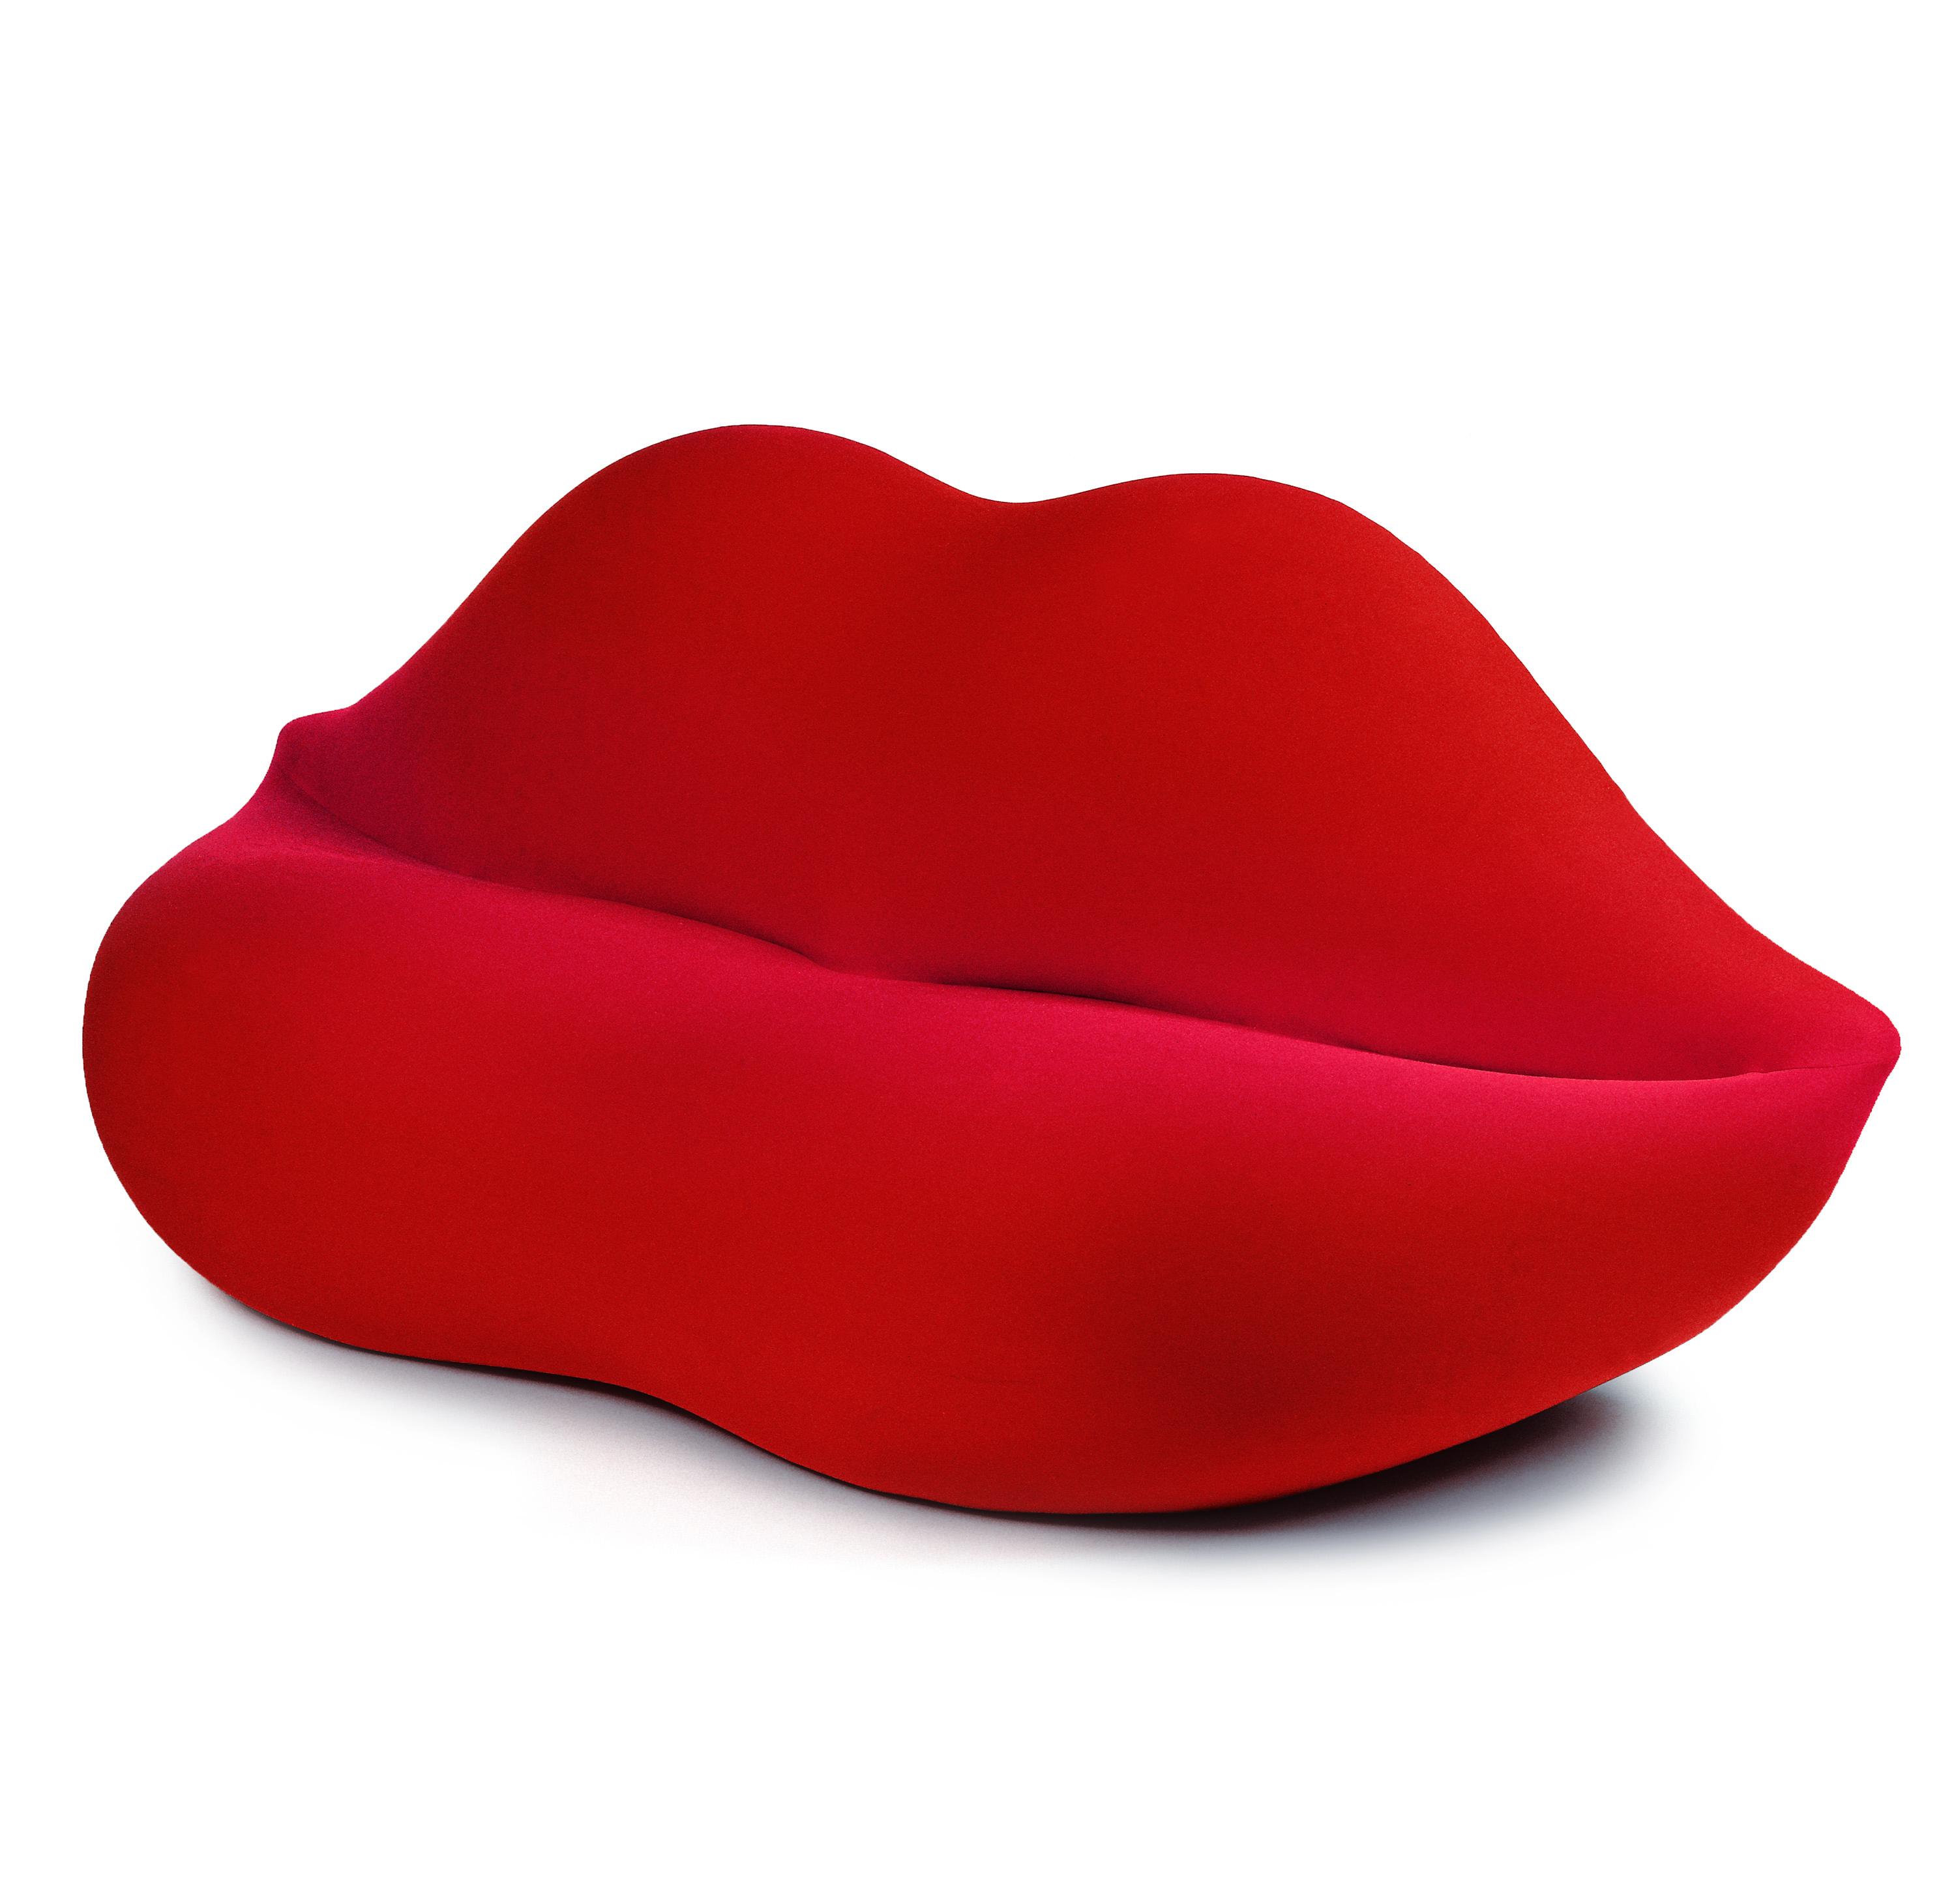 This is a sofa in the shape of lush red lips.